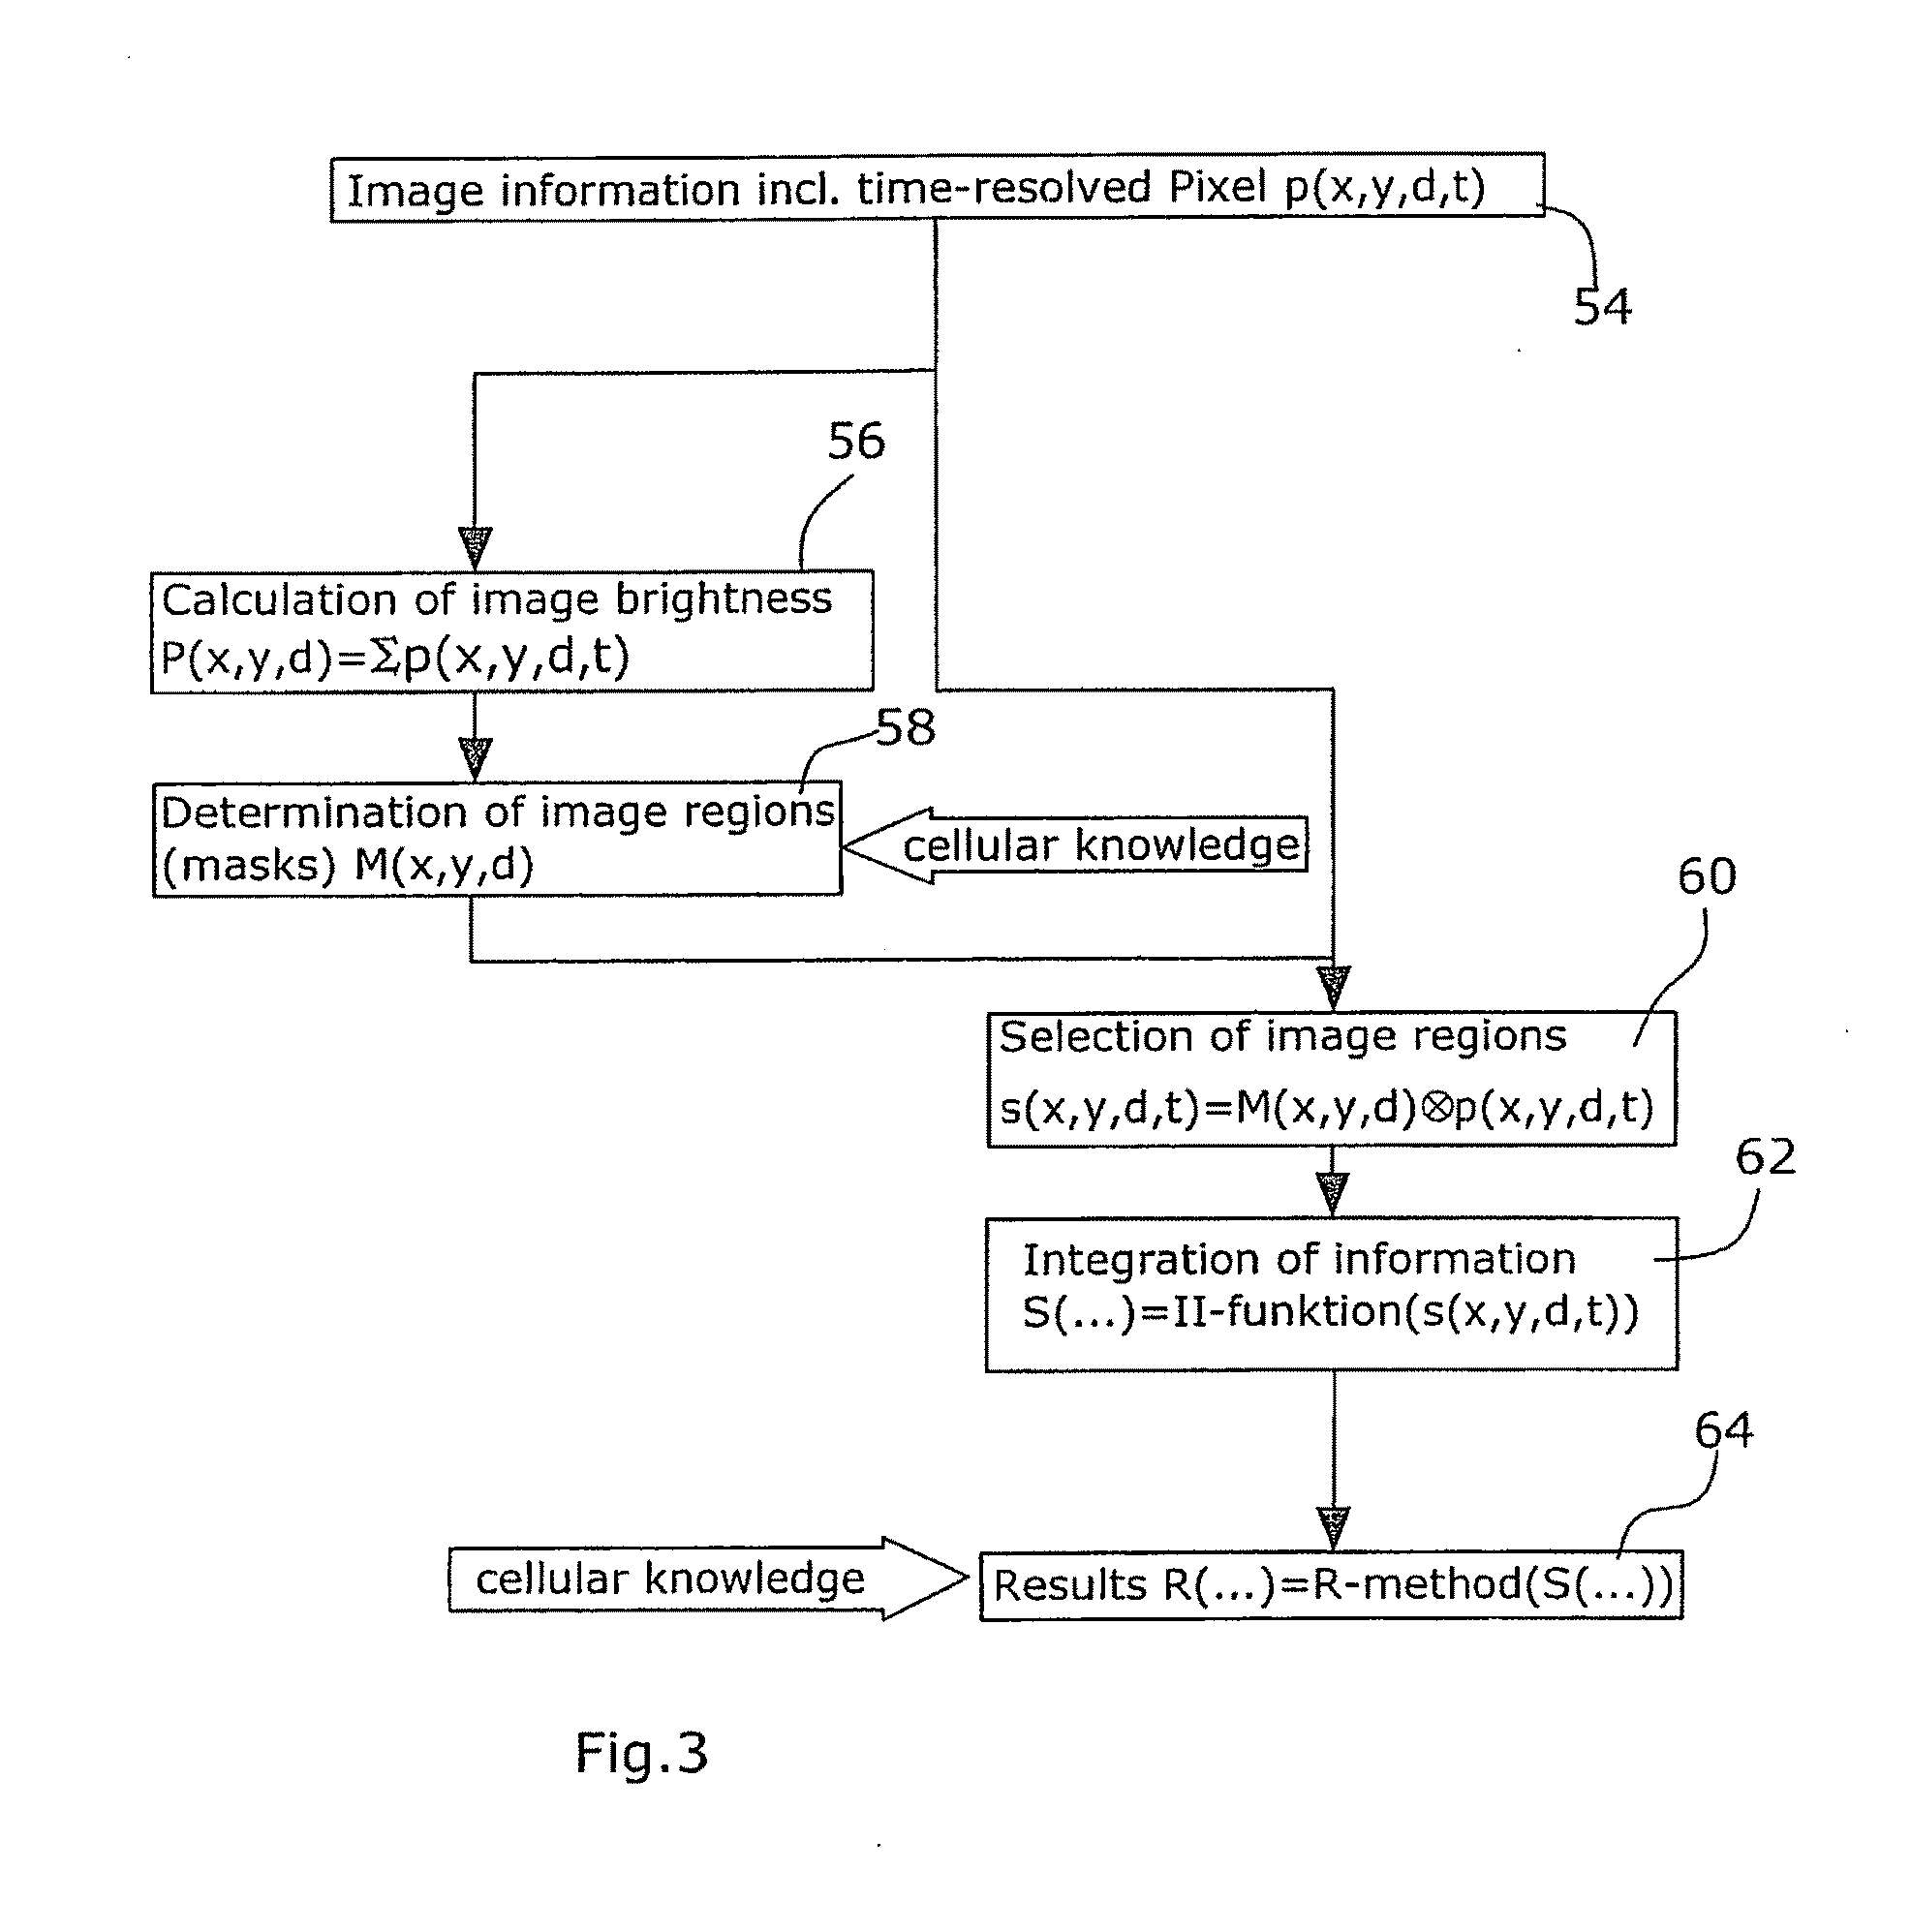 Analysis method for chemical and/or biological samples